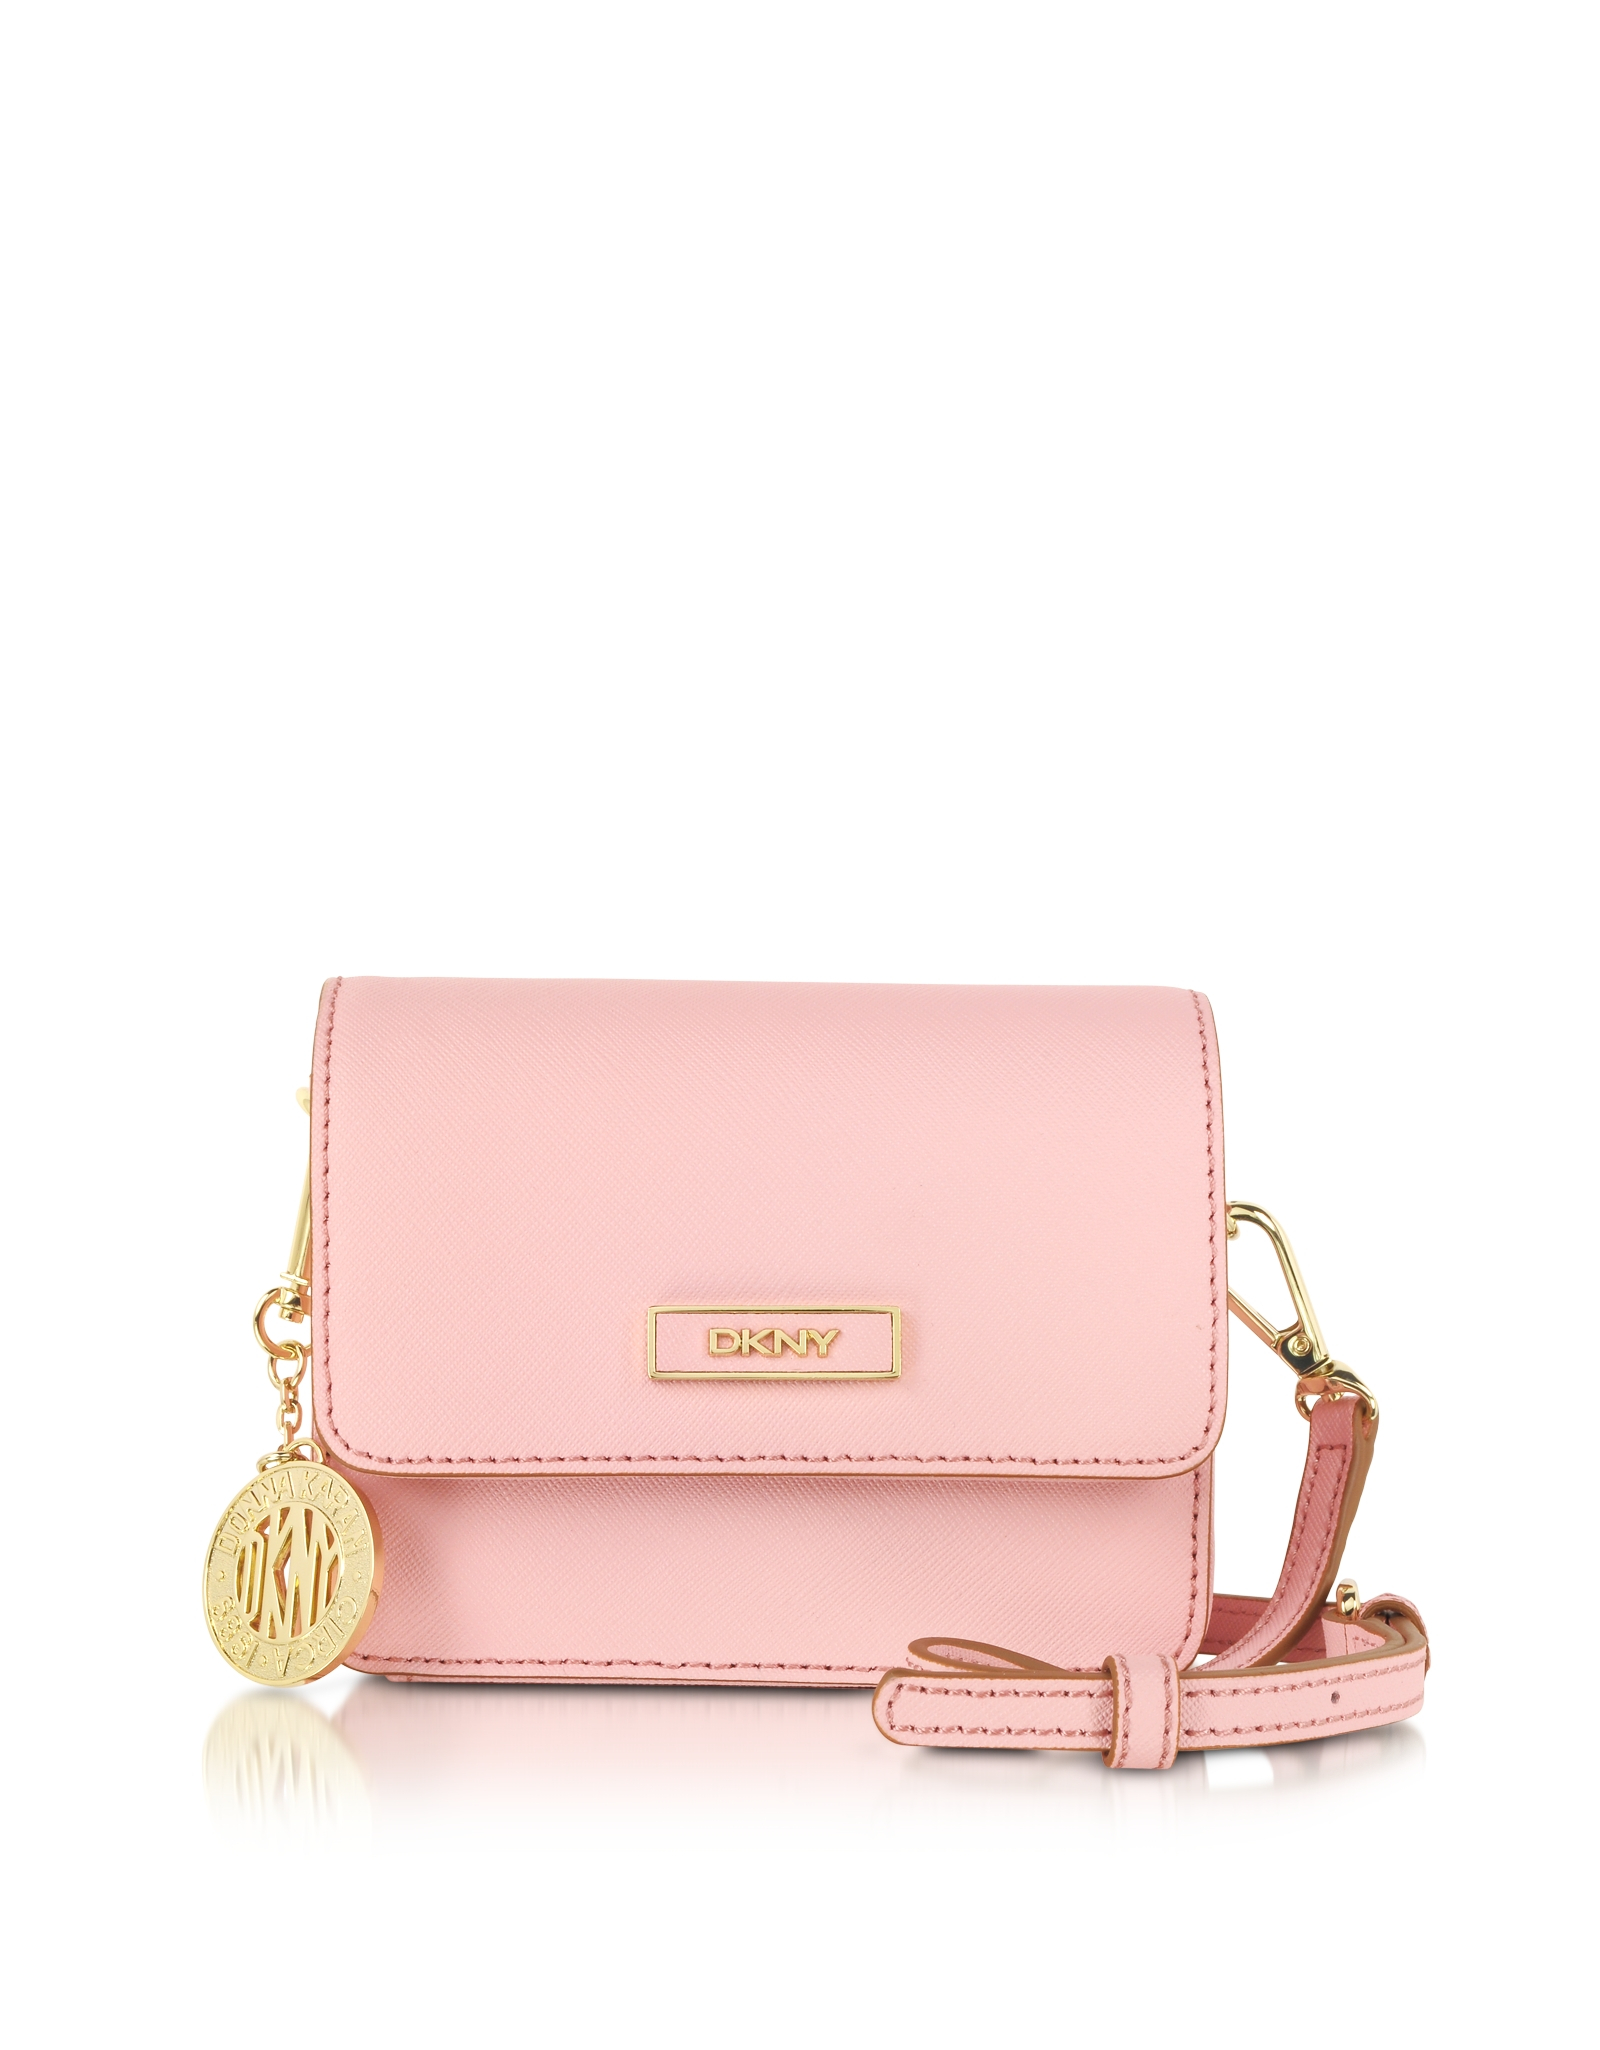 Lyst - Dkny Bryant Park Mini Pink Saffiano Leather Crossbody Bag in Pink